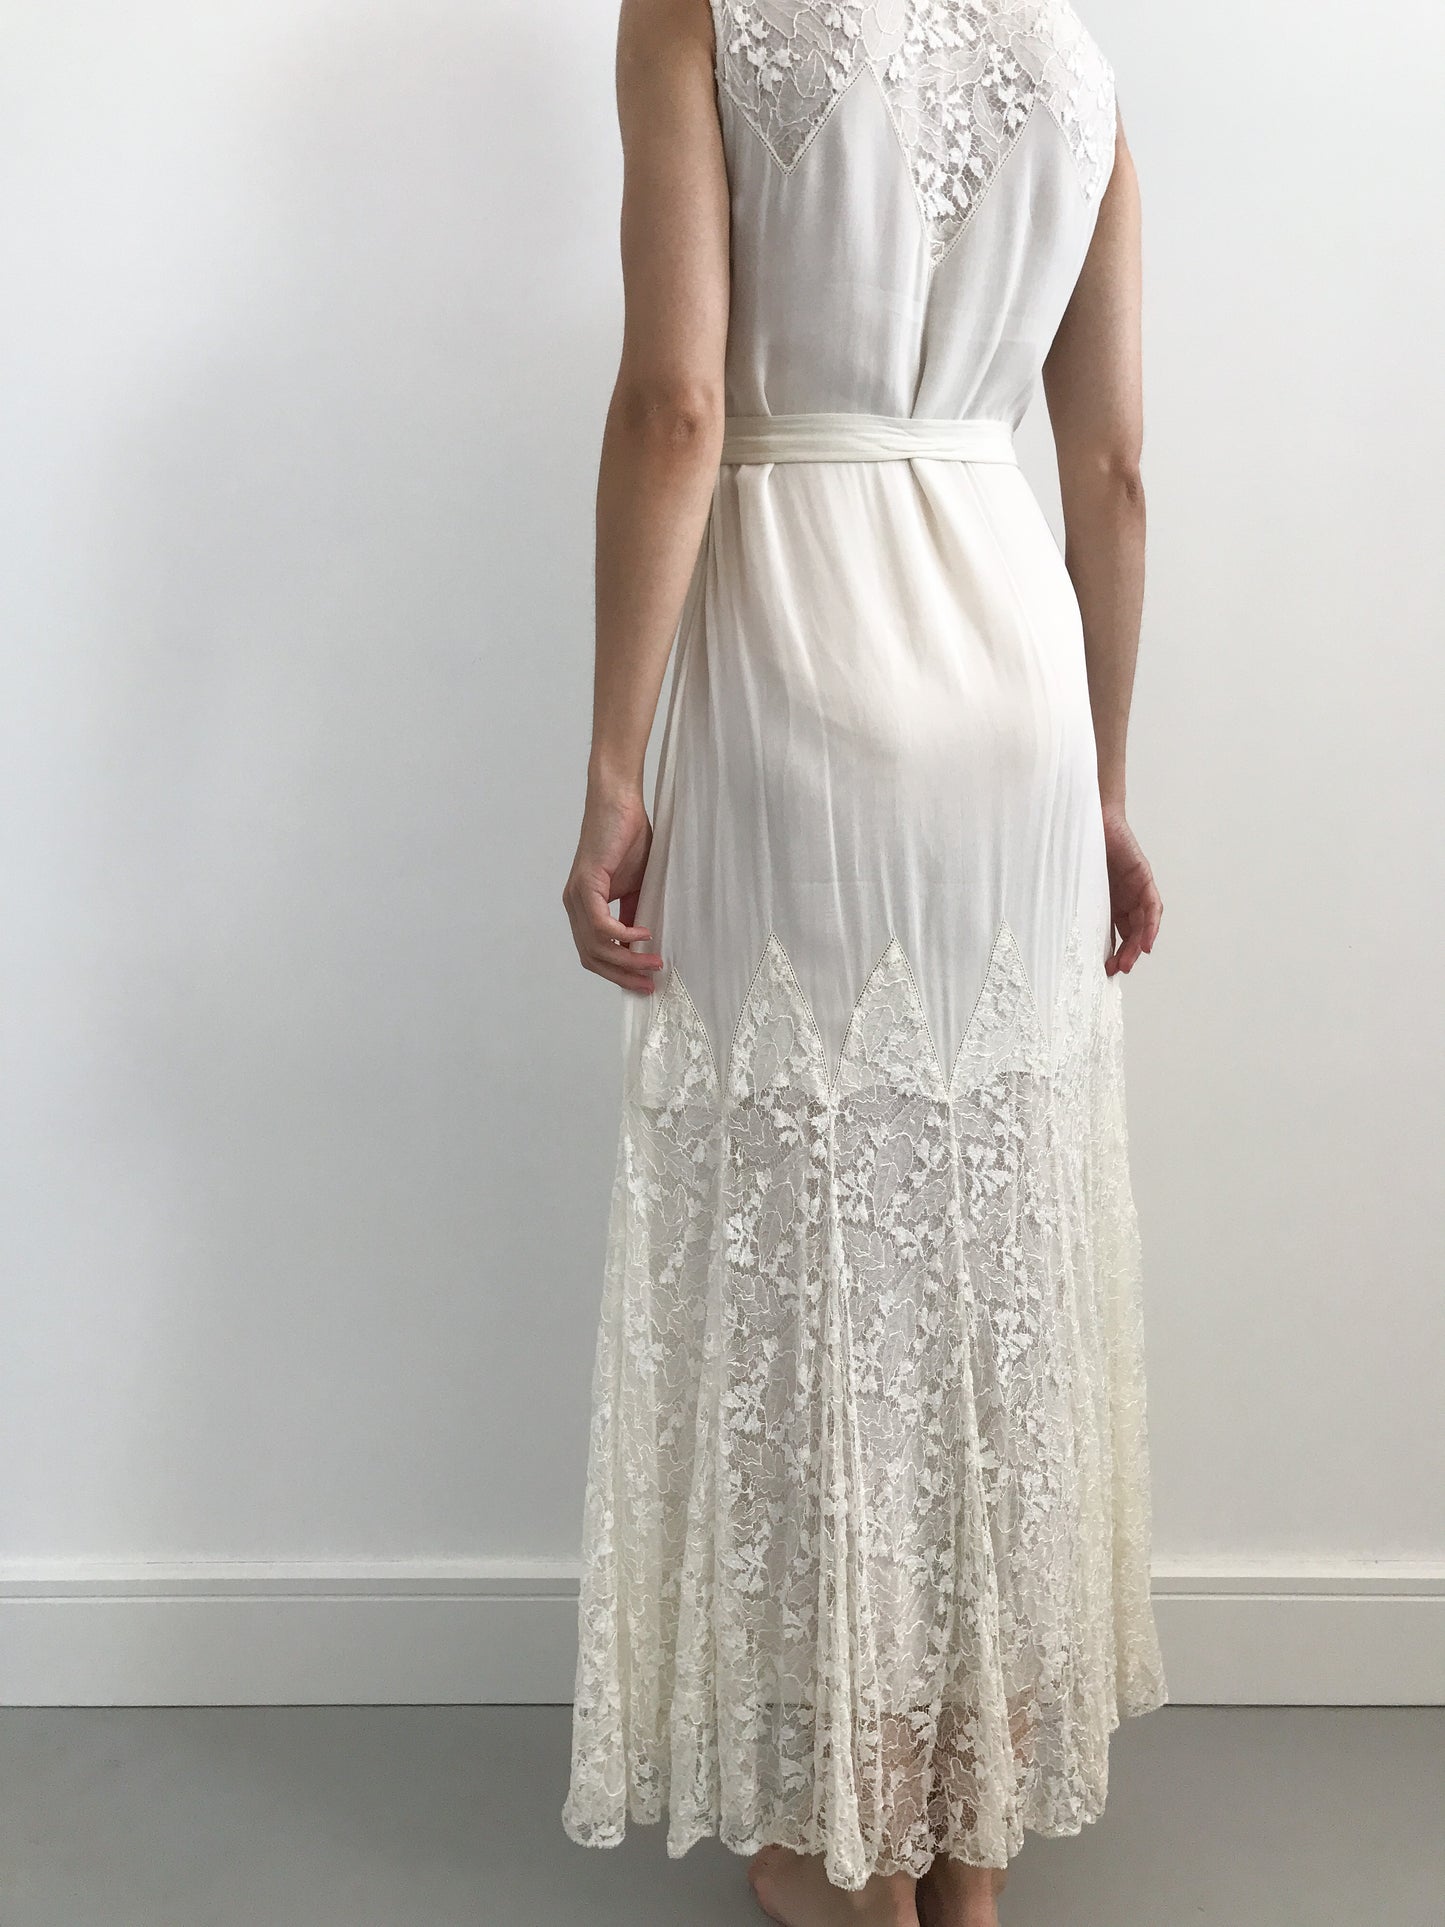 1930s Chiffon & Floral Lace Wedding Gown